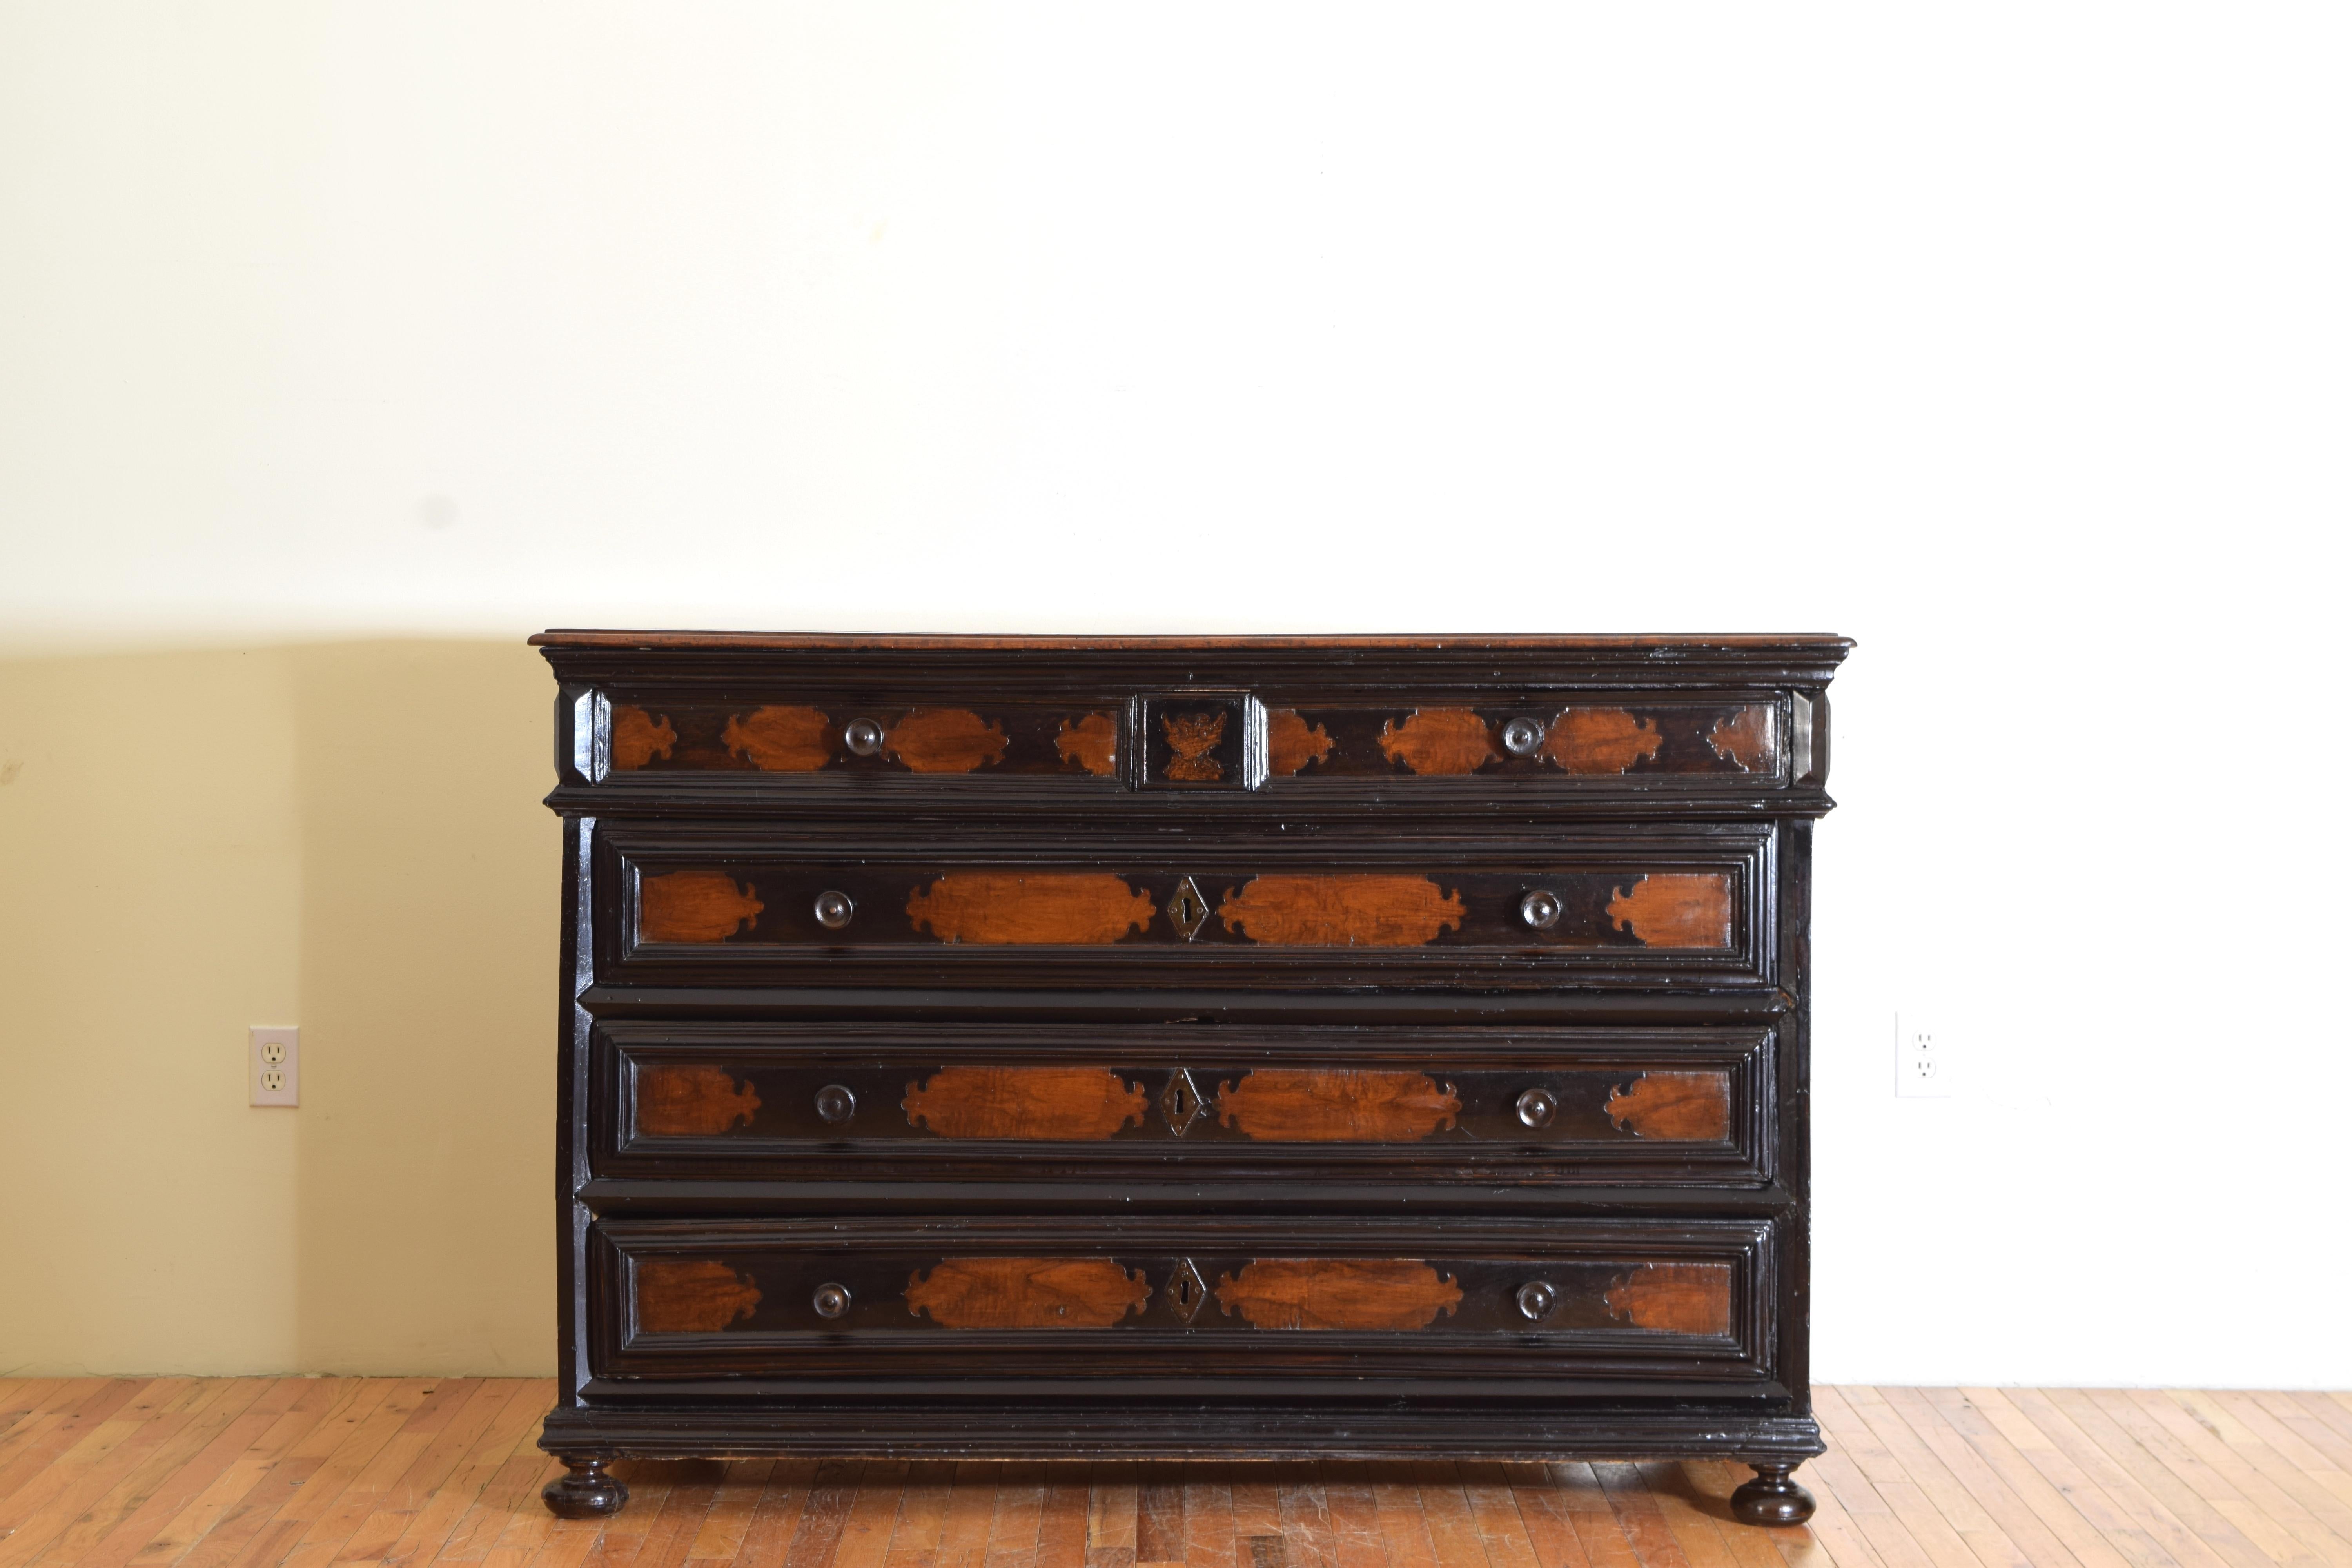 The walnut and partially ebonized body in the rectilinear form resting on ebonized bun feet, three large drawers with an additional two smaller upper drawers, the front panels embellished with patterns of contrasting color.